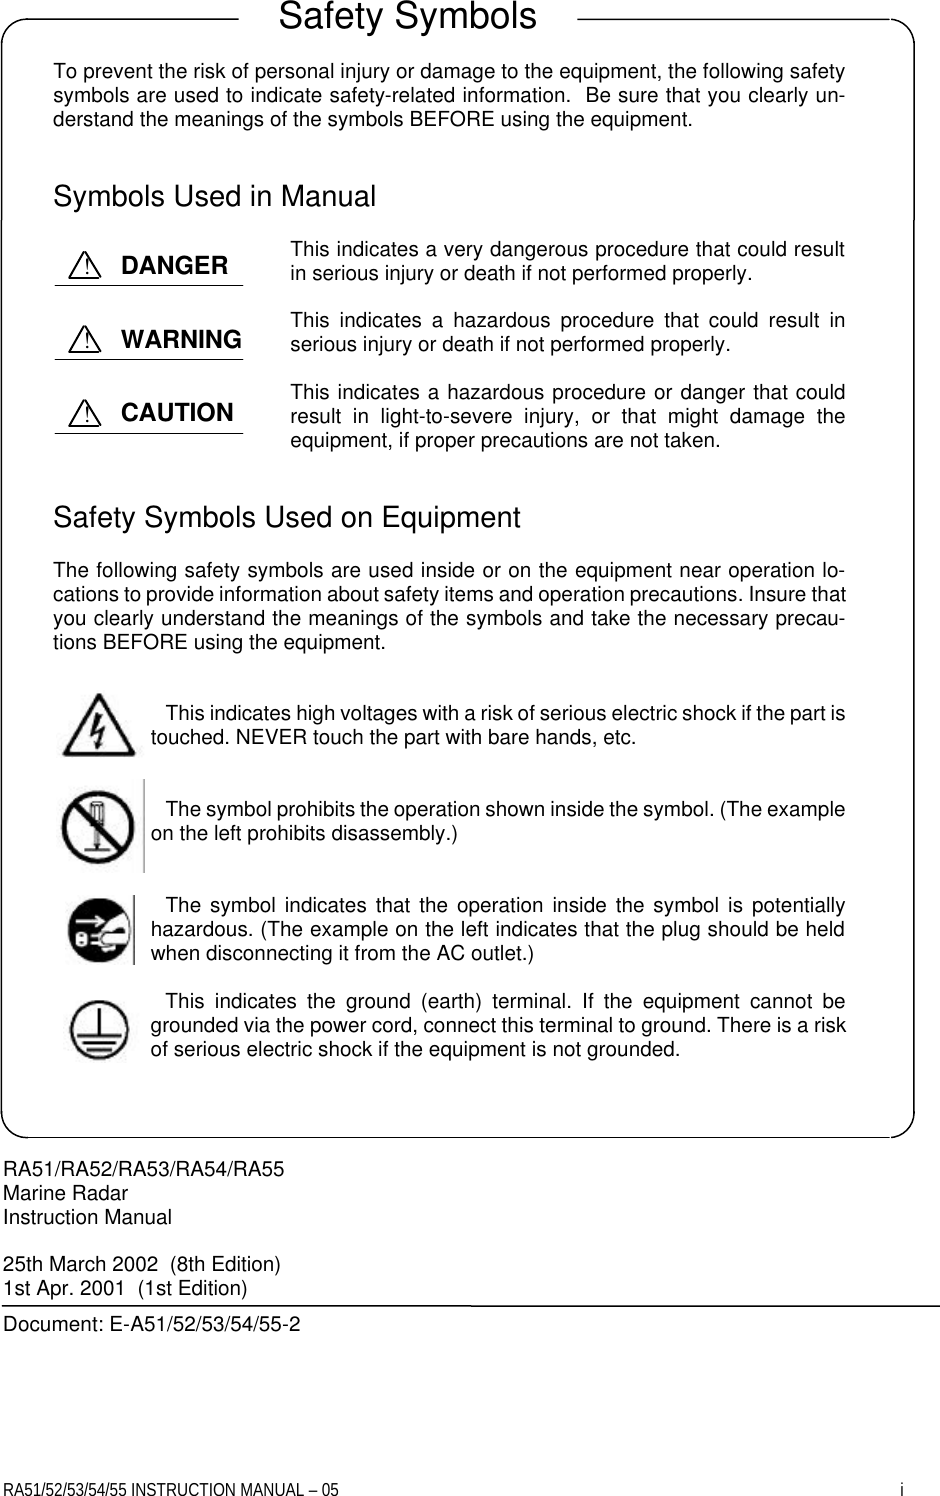 RA51/52/53/54/55 INSTRUCTION MANUAL – 05    i     To prevent the risk of personal injury or damage to the equipment, the following safety symbols are used to indicate safety-related information.  Be sure that you clearly un-derstand the meanings of the symbols BEFORE using the equipment.   Symbols Used in Manual  This indicates a very dangerous procedure that could result in serious injury or death if not performed properly.  This indicates a hazardous procedure that could result in serious injury or death if not performed properly.  This indicates a hazardous procedure or danger that could result in light-to-severe injury, or that might damage the equipment, if proper precautions are not taken.   Safety Symbols Used on Equipment  The following safety symbols are used inside or on the equipment near operation lo-cations to provide information about safety items and operation precautions. Insure that you clearly understand the meanings of the symbols and take the necessary precau-tions BEFORE using the equipment.   This indicates high voltages with a risk of serious electric shock if the part is touched. NEVER touch the part with bare hands, etc.   The symbol prohibits the operation shown inside the symbol. (The example on the left prohibits disassembly.)   The symbol indicates that the operation inside the symbol is potentially hazardous. (The example on the left indicates that the plug should be held when disconnecting it from the AC outlet.)  This indicates the ground (earth) terminal. If the equipment cannot be grounded via the power cord, connect this terminal to ground. There is a risk of serious electric shock if the equipment is not grounded.     RA51/RA52/RA53/RA54/RA55 Marine Radar Instruction Manual  25th March 2002  (8th Edition) 1st Apr. 2001  (1st Edition) Document: E-A51/52/53/54/55-2  Safety Symbols DANGER ! WARNING ! CAUTION ! 